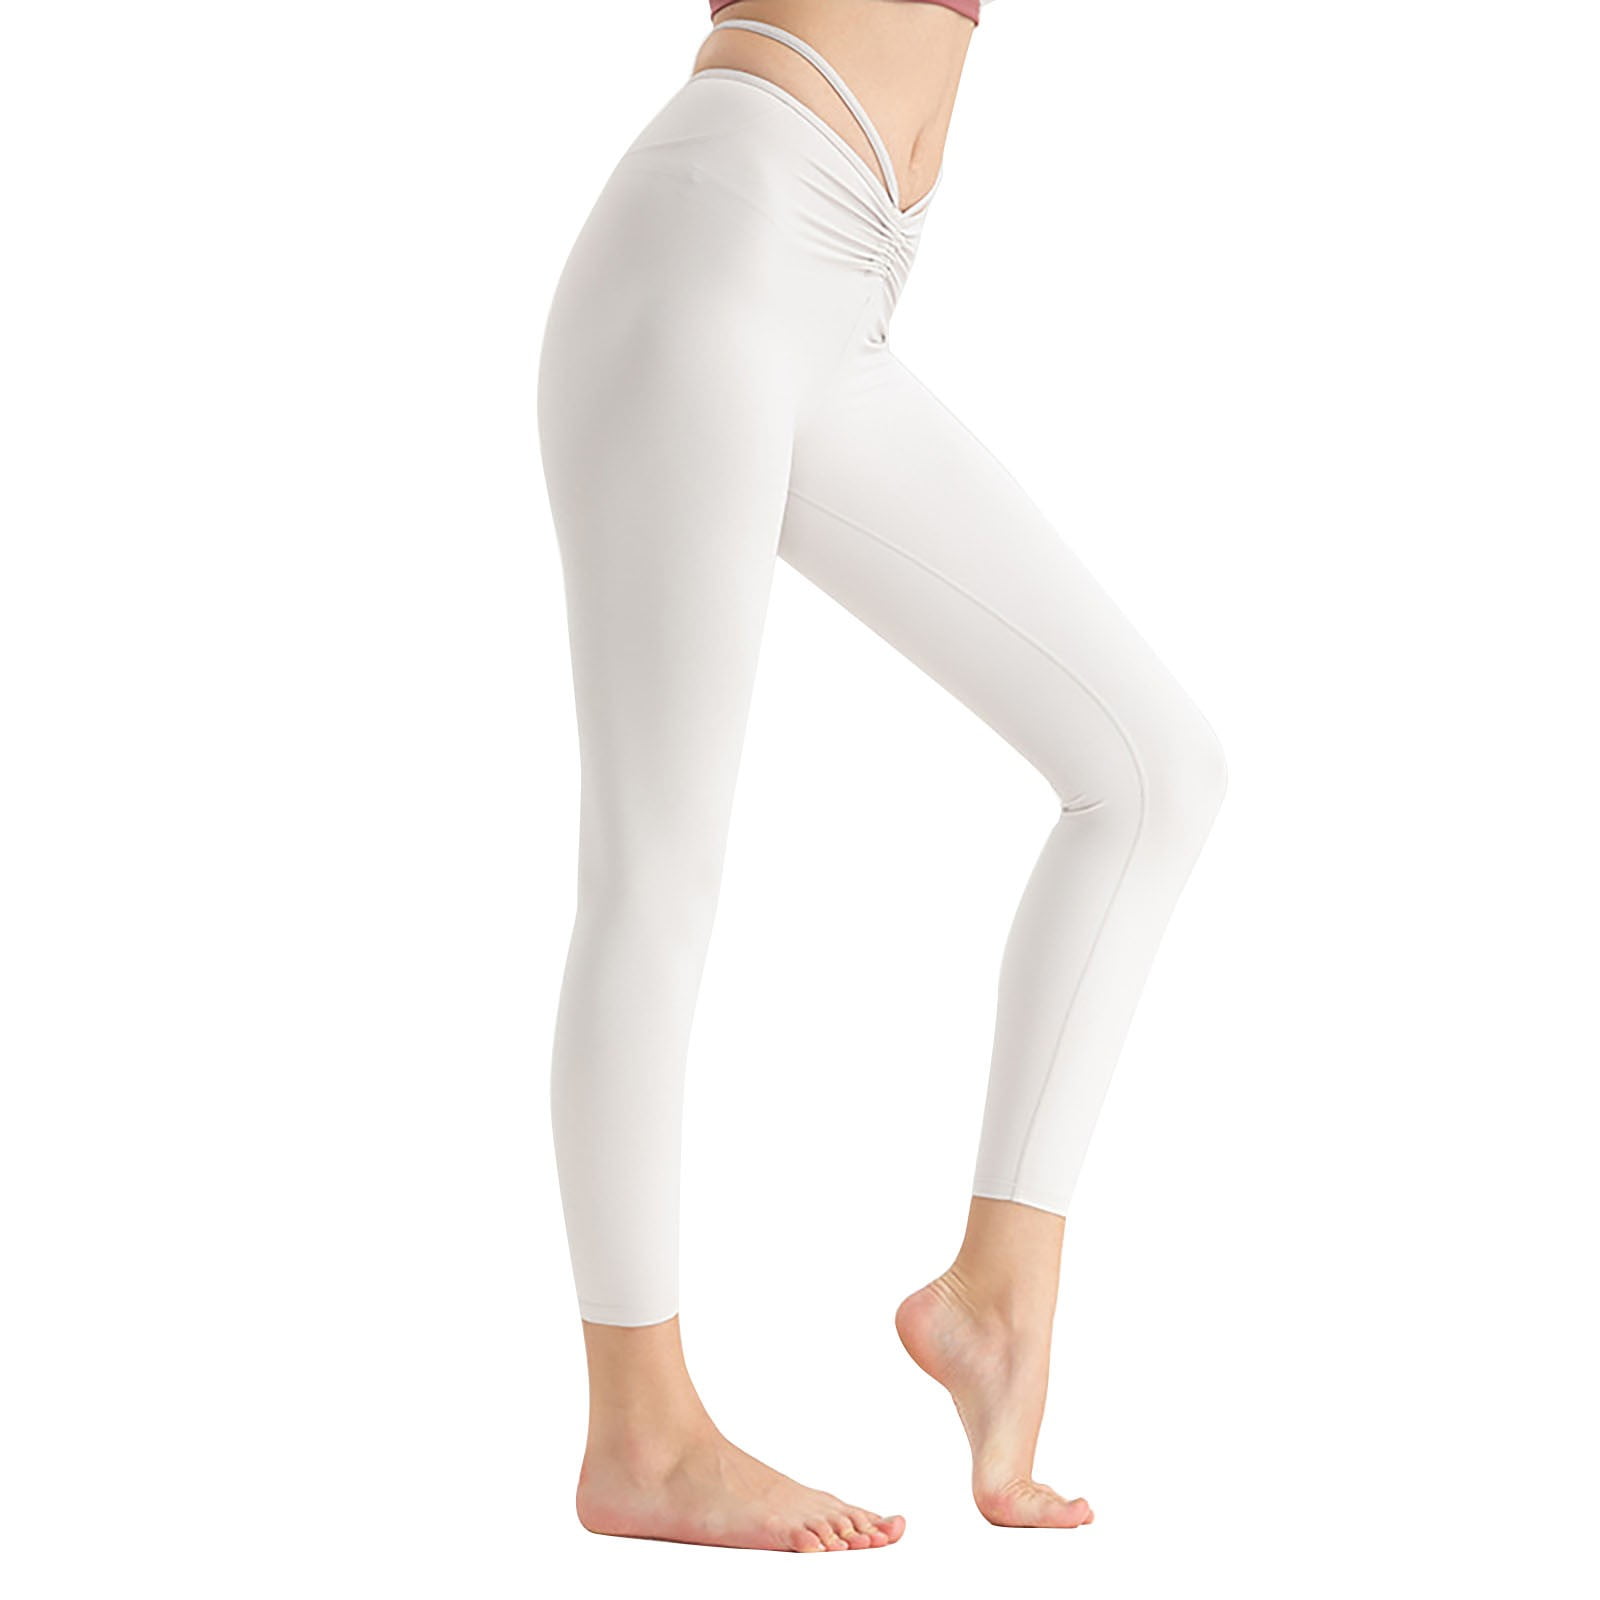 Booker Leggings With Pockets For Women Non See Through Workout